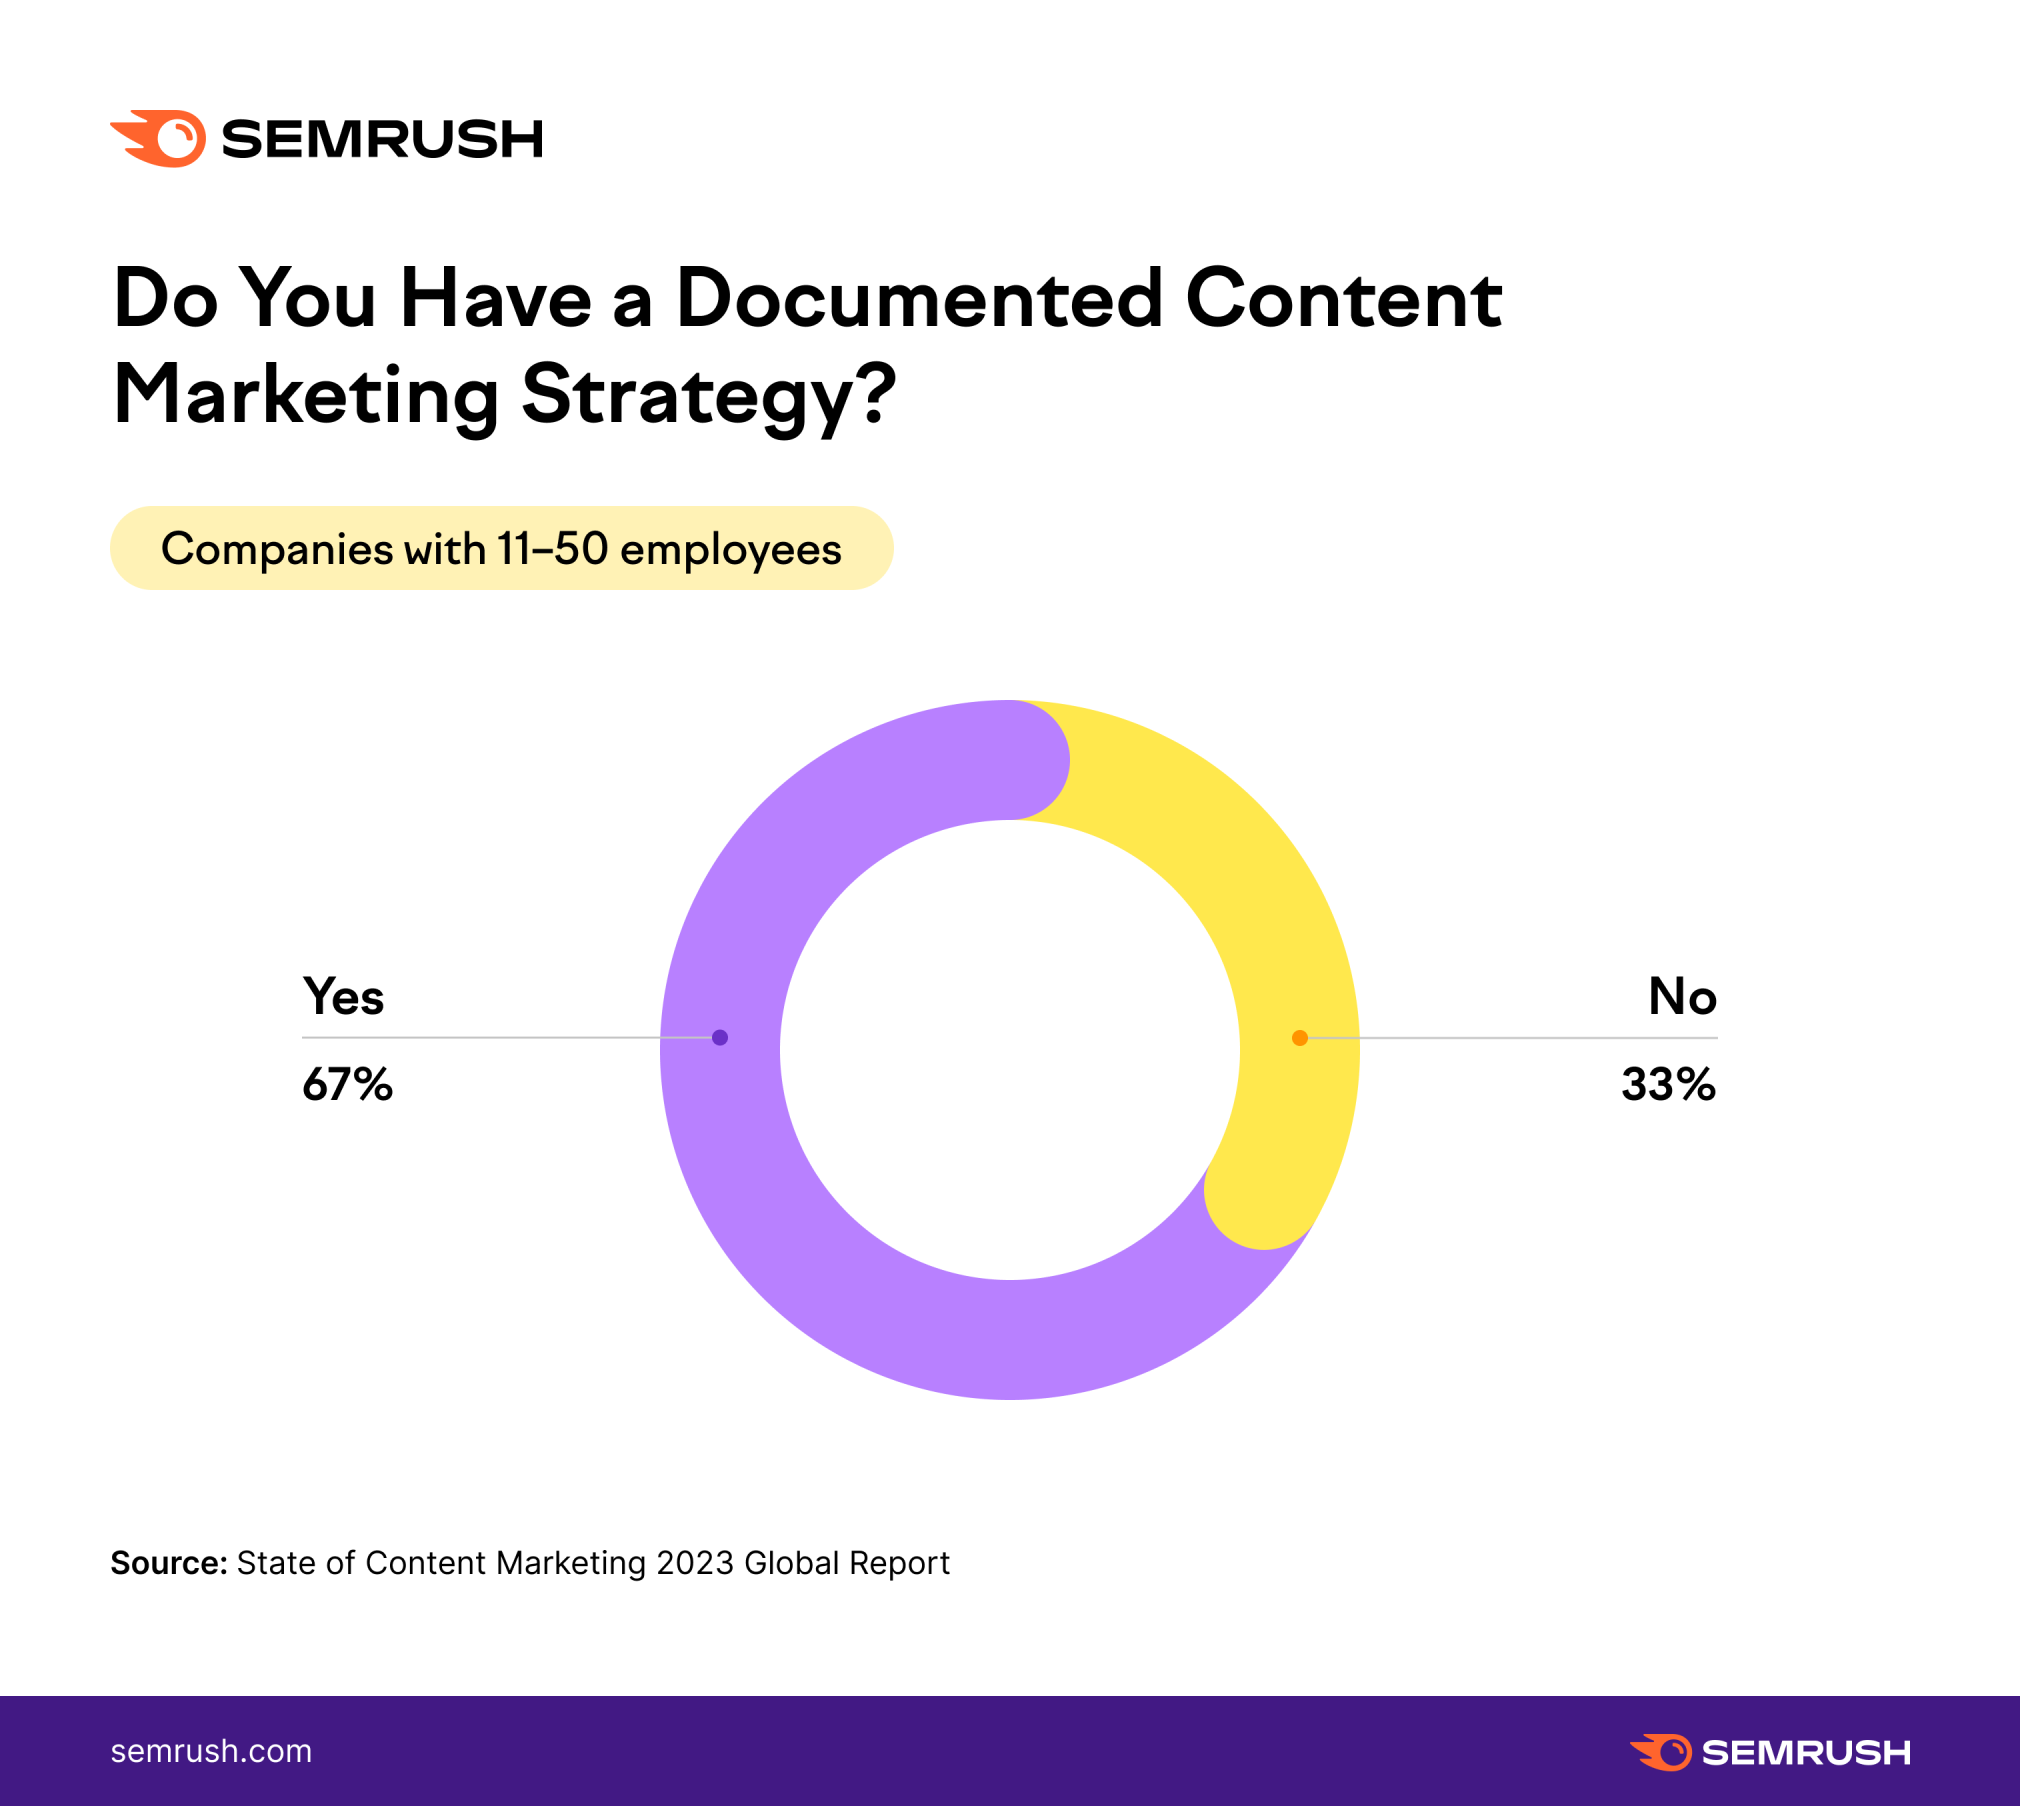 Do small businesses document their content strategy?